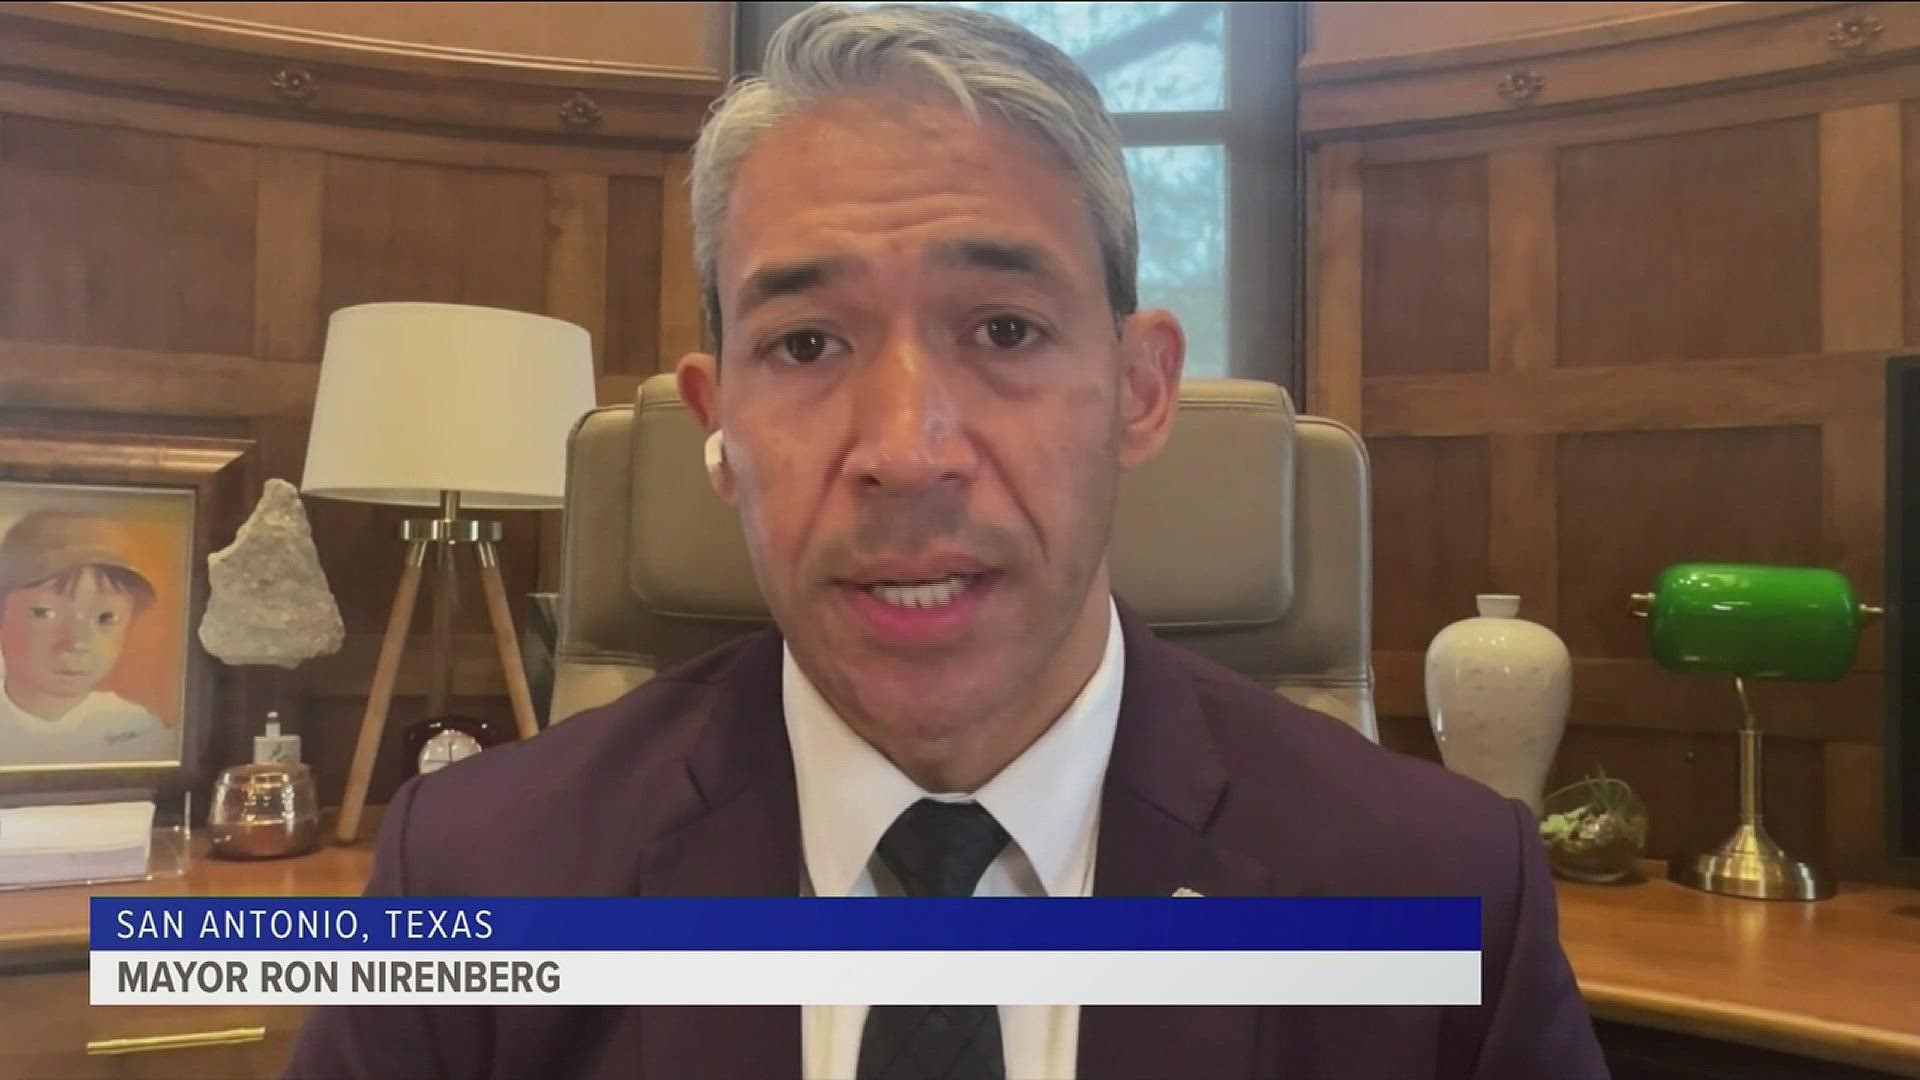 Mayor Ron Nirenberg also addresses the city's Symphony strike in some of his first public comments on the issue.